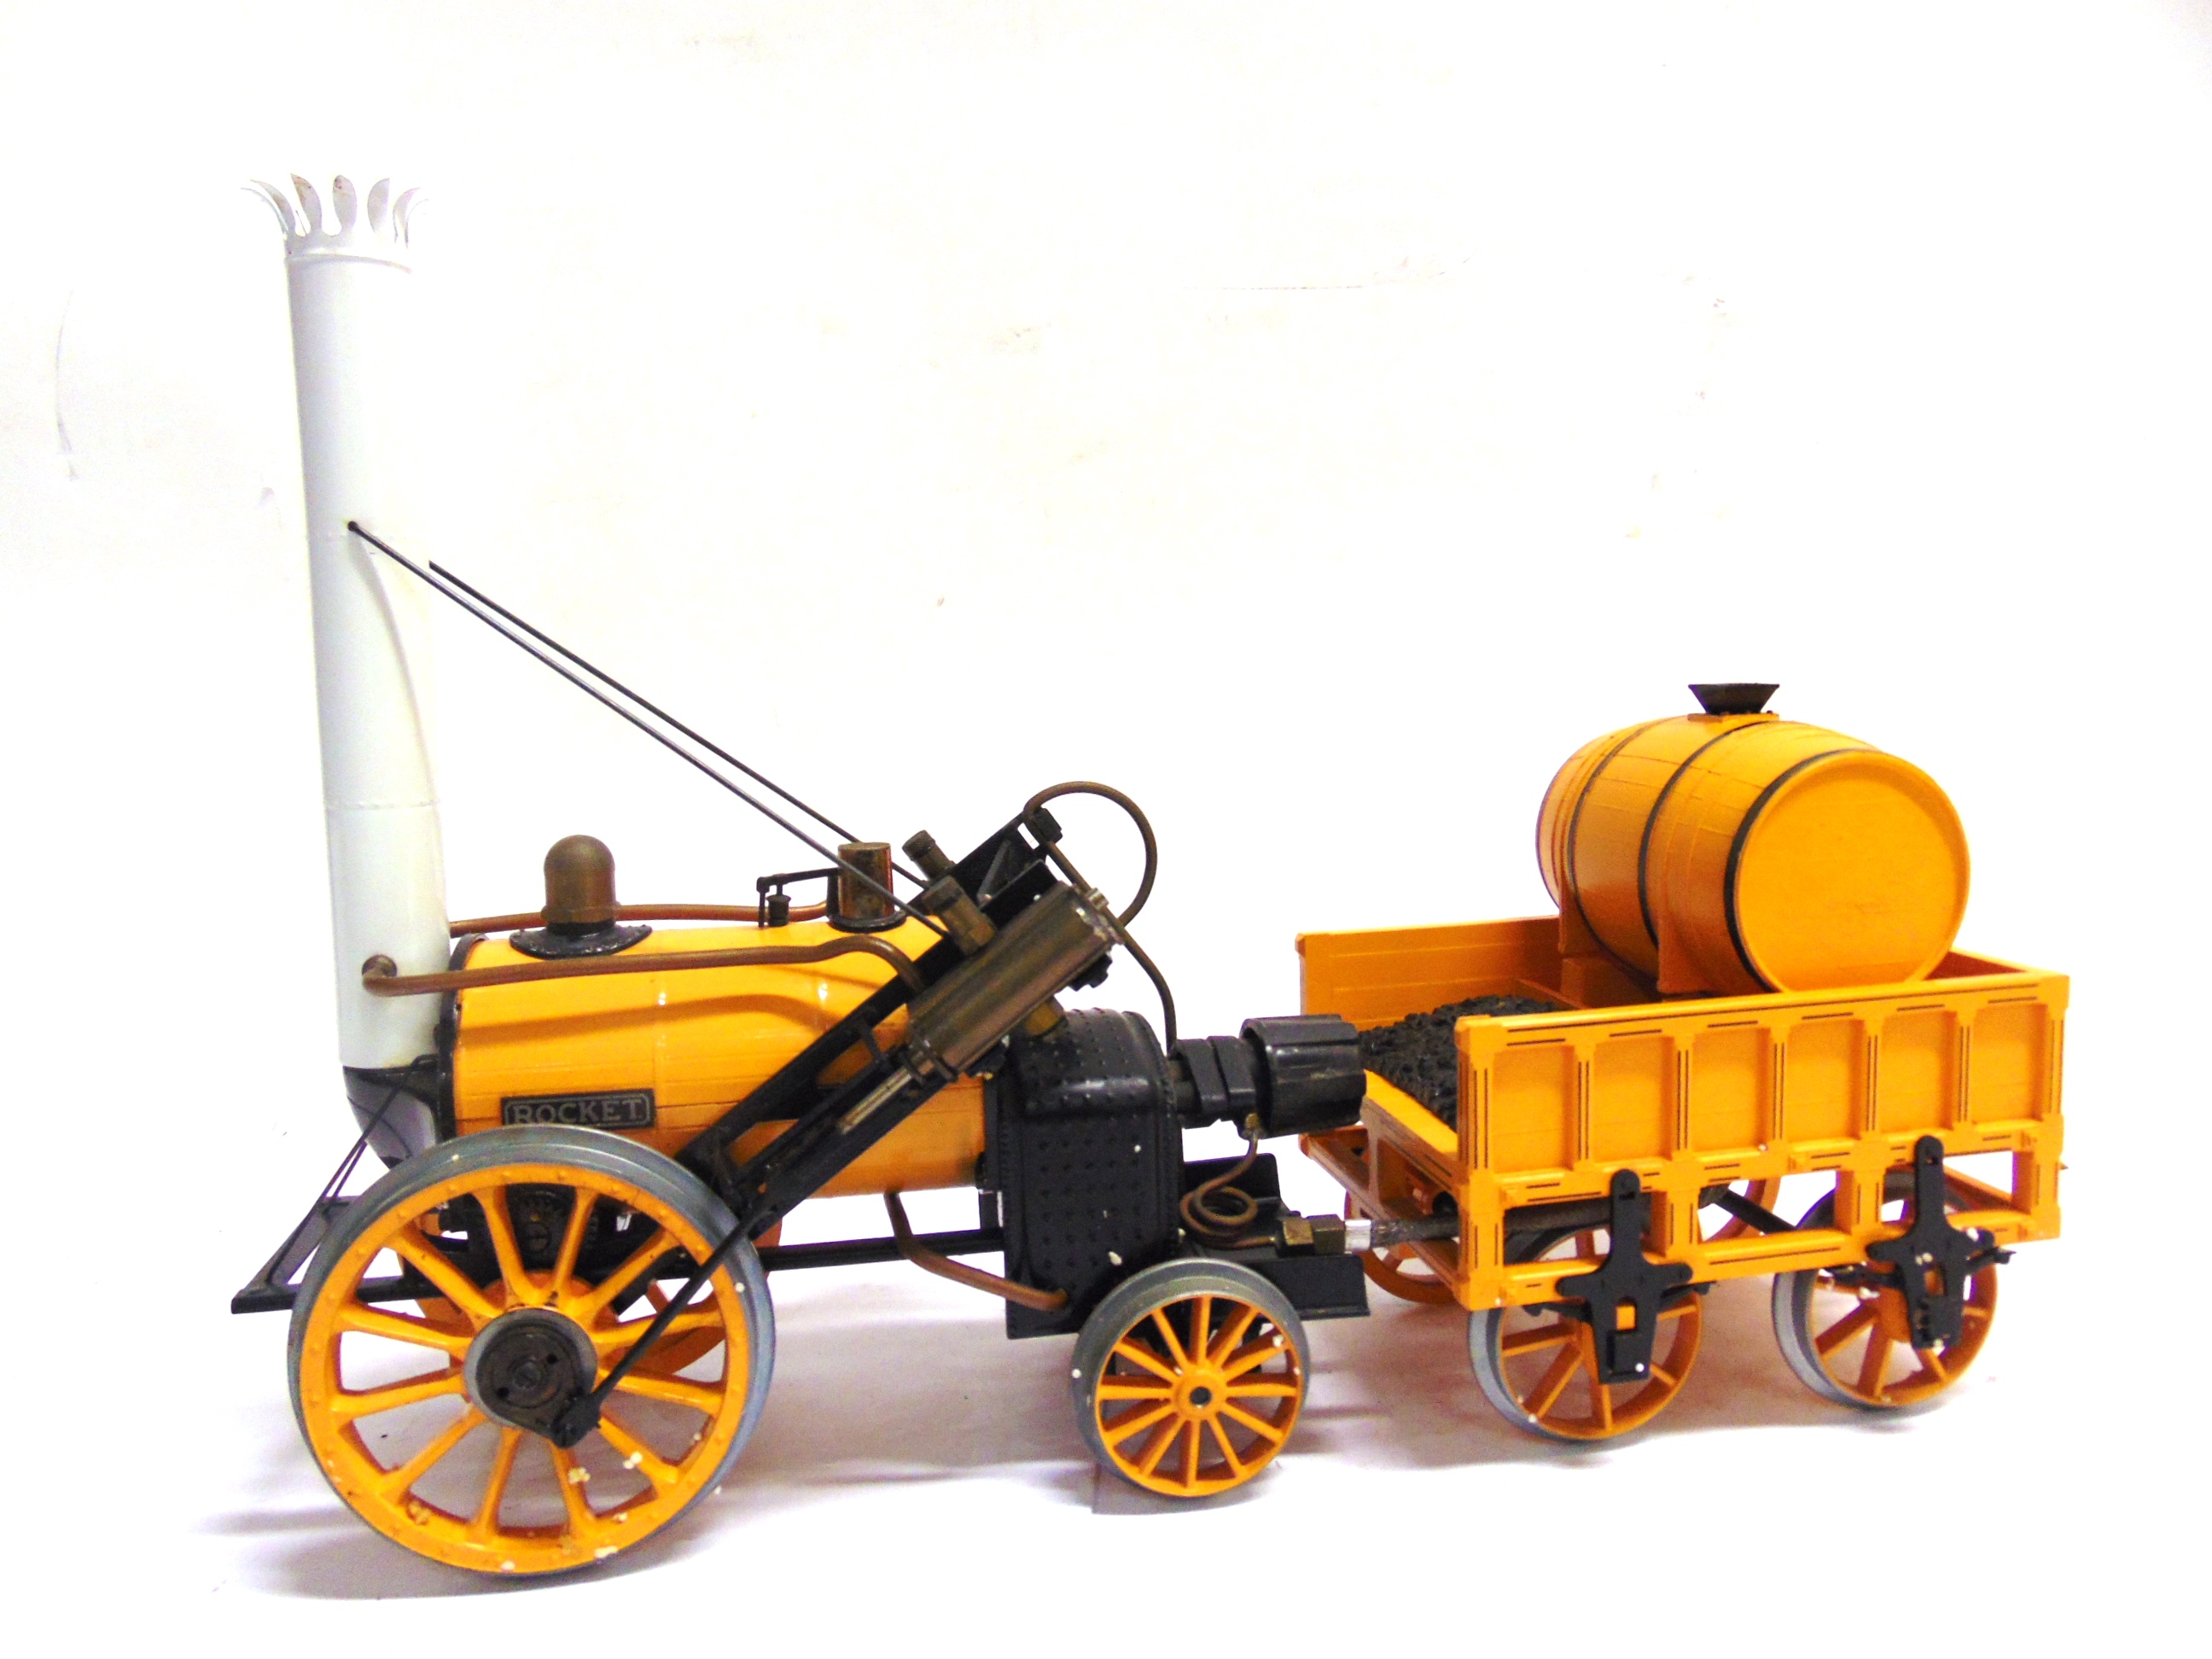 [3 1/2 INCH GAUGE]. A HORNBY NO.G100, LIVE-STEAM STEPHENSON'S ROCKET yellow livery, boxed; - Image 2 of 2